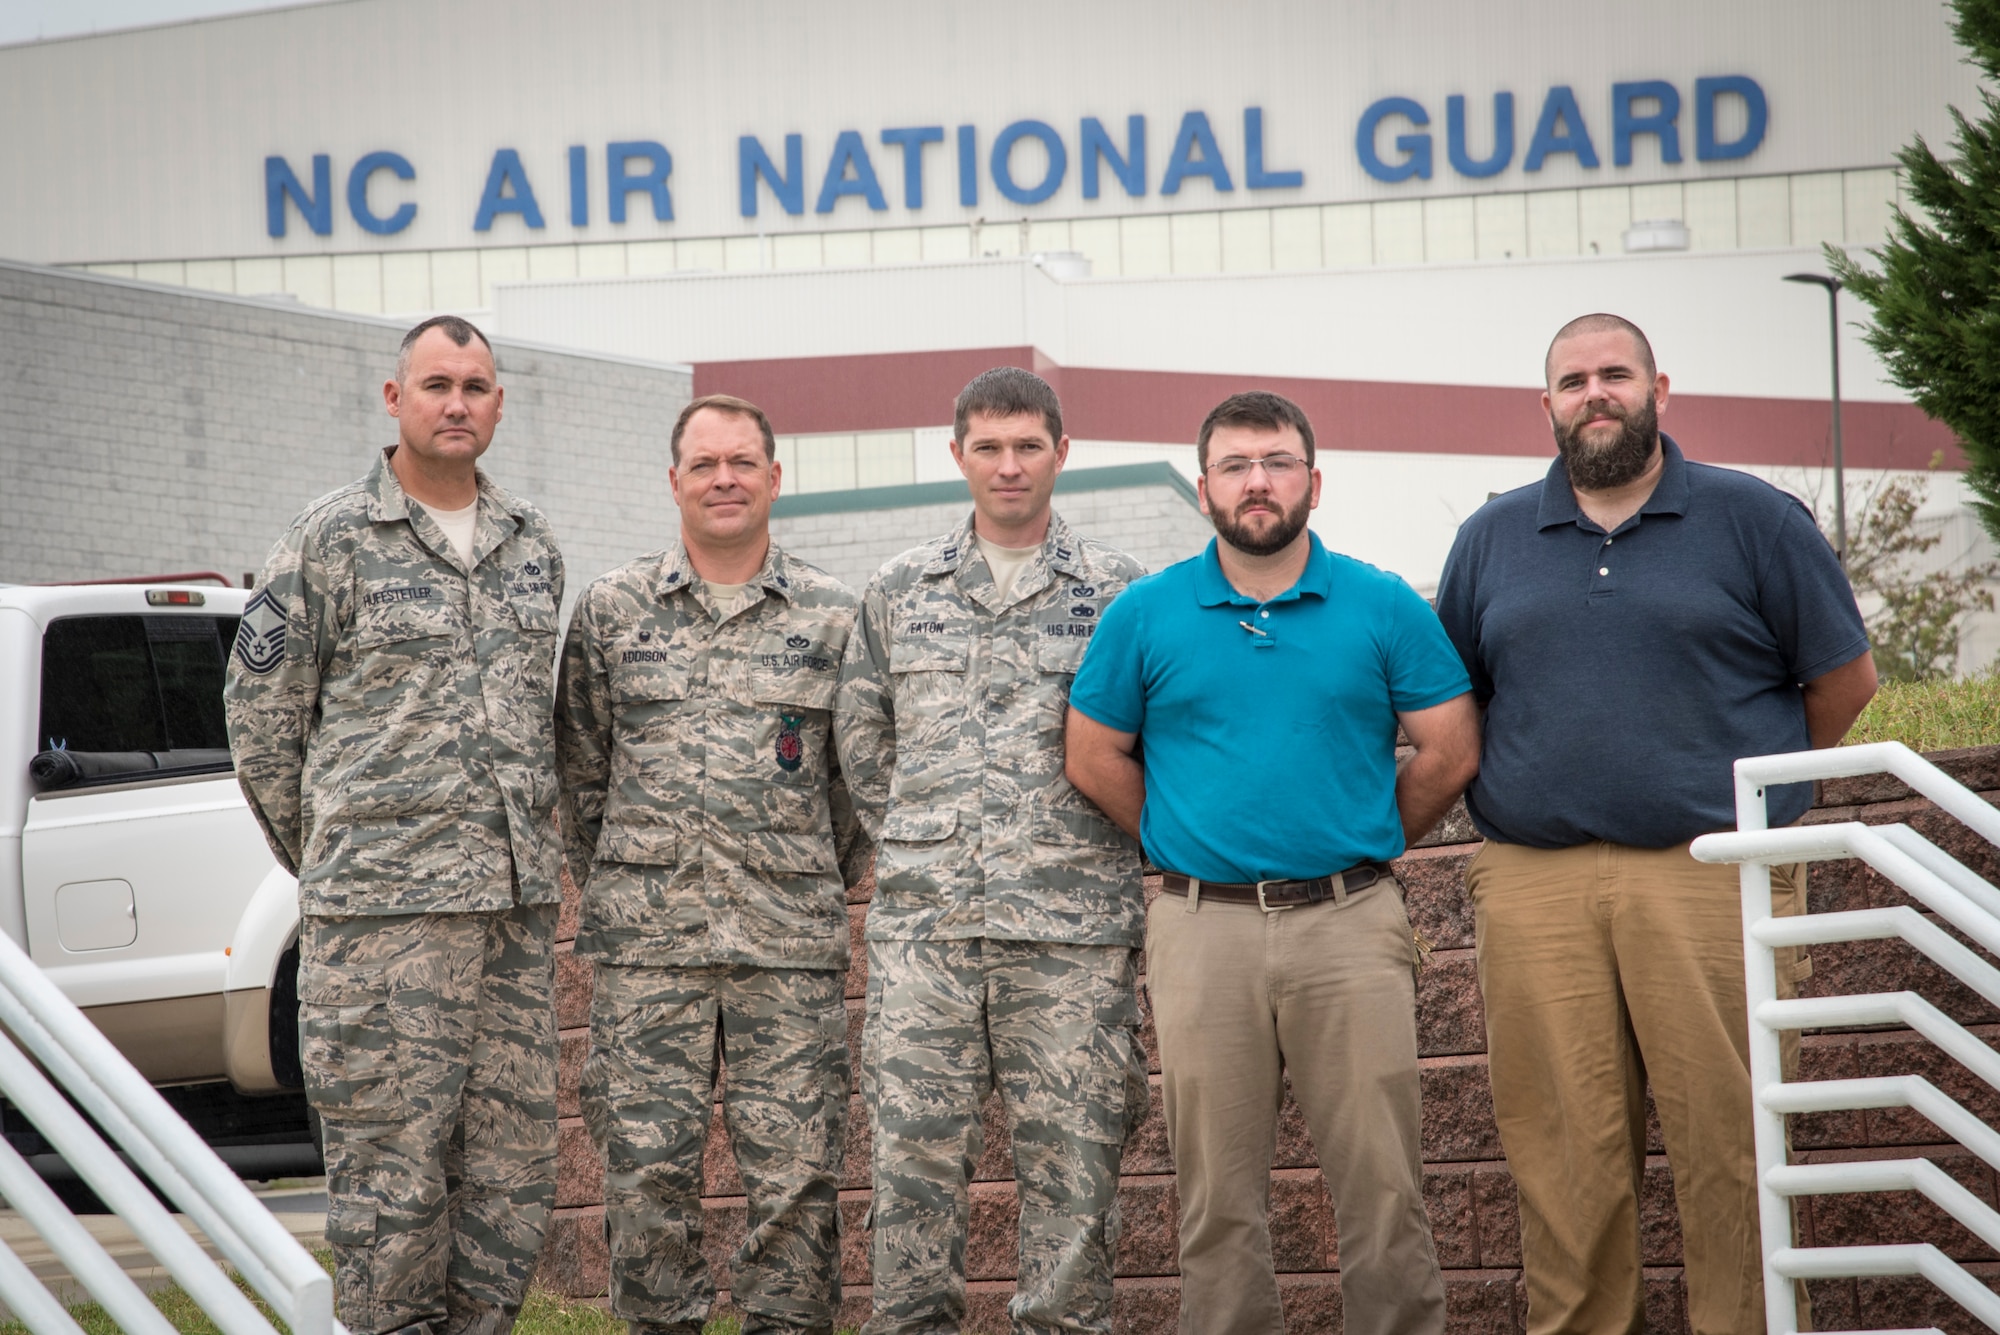 The North Carolina Air National Guard, 145th Civil Engineer Squadron was selected as recipients of the 2016 Federal Energy and Water Management Award by the Federal Energy Management Program (FEMP) September 2016. The team is made up of NCANG members and civilian employees including Senior Master Sgt. Jason Huffstetler, Lt. Col. Milton Addison, Capt. James Eaton, Mr. Caleb Chambers and Mr. Christopher Bryant. The award recognizes individuals and organizations for significant contributions to energy and water efficiency within the federal government. (U.S. Air National Guard photo by Staff Sgt. Paul Porter)